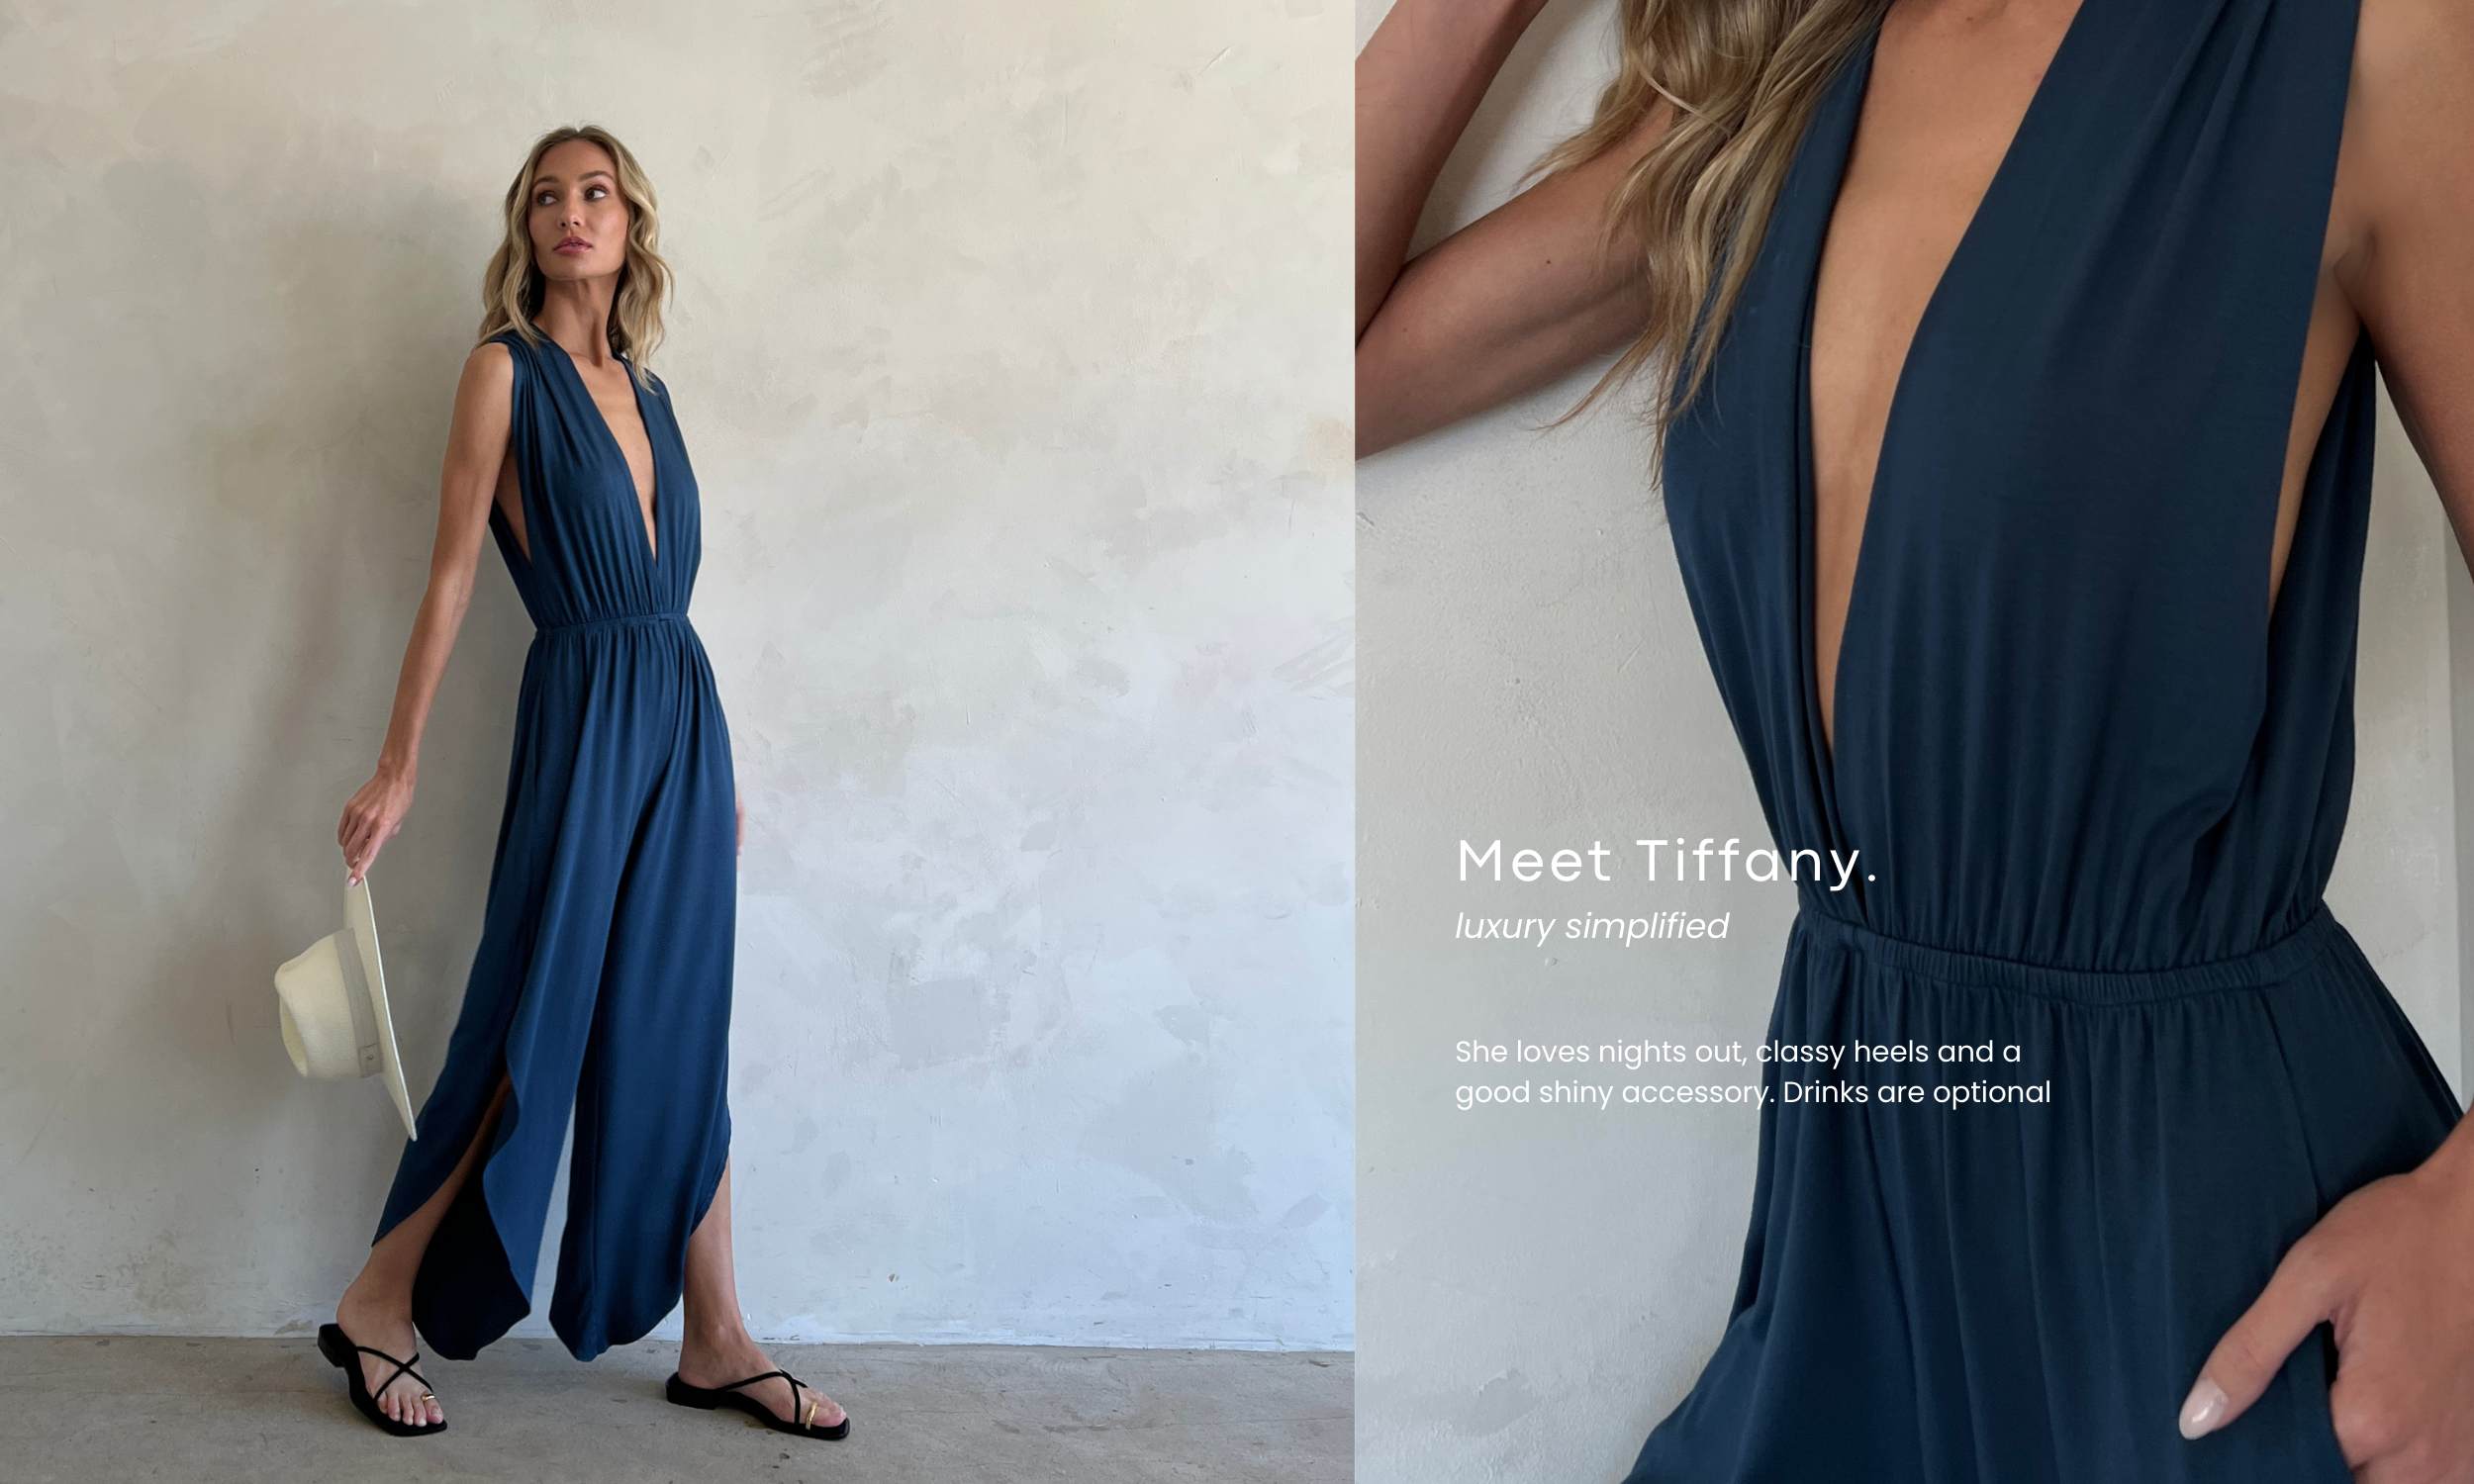 Meet Tiffany.  luxury jumpsuits simplified.  She loves nights out, classy heels, and a good shiny accessory.  Drinks are optional.